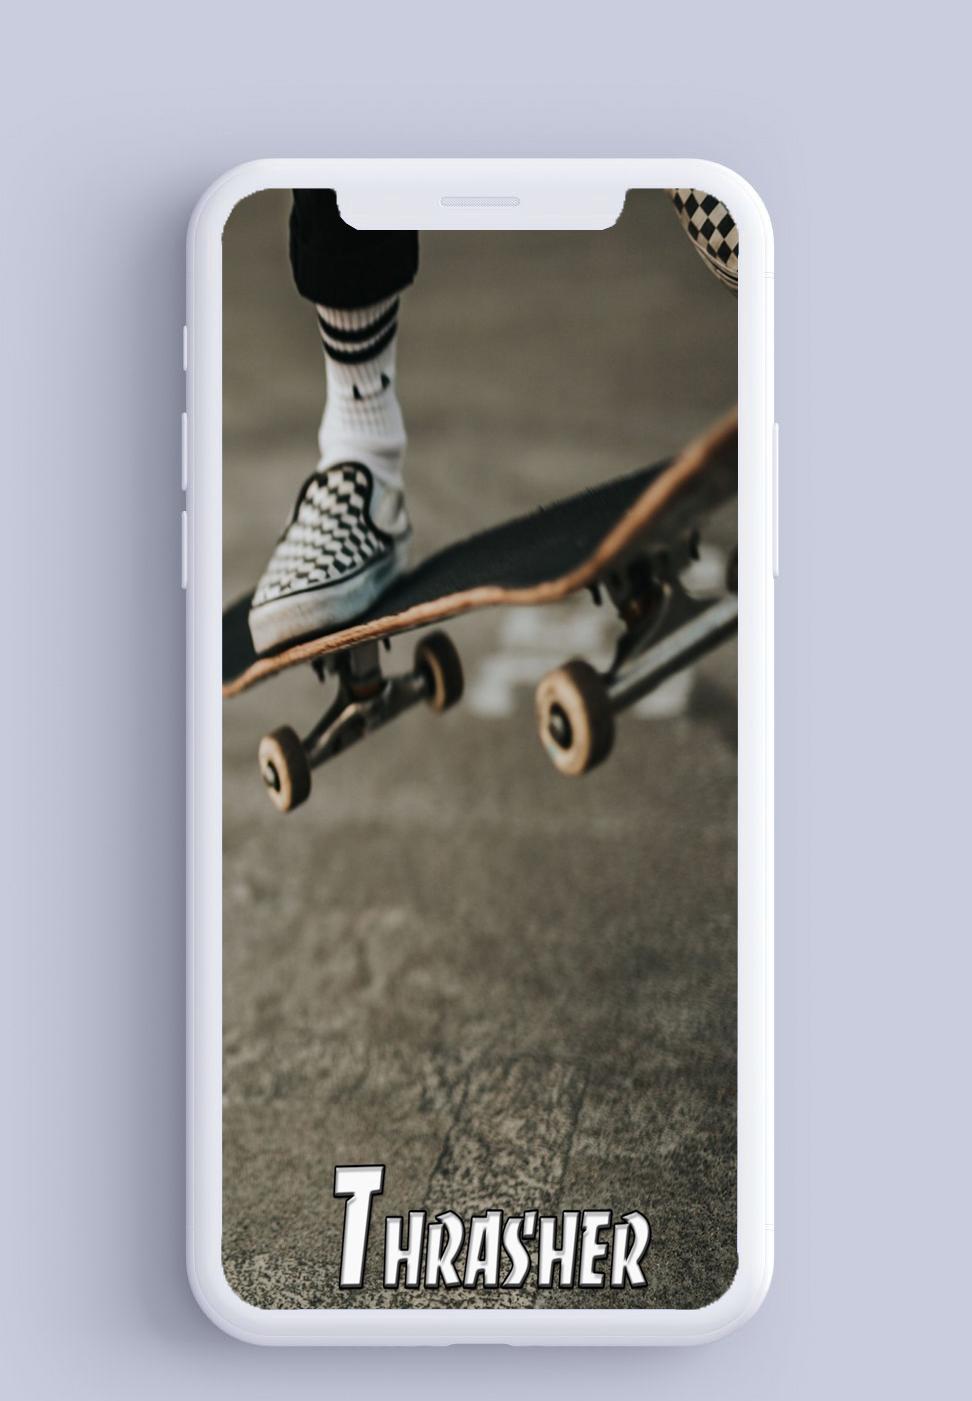 Thrasher Wallpaper for Android - APK Download